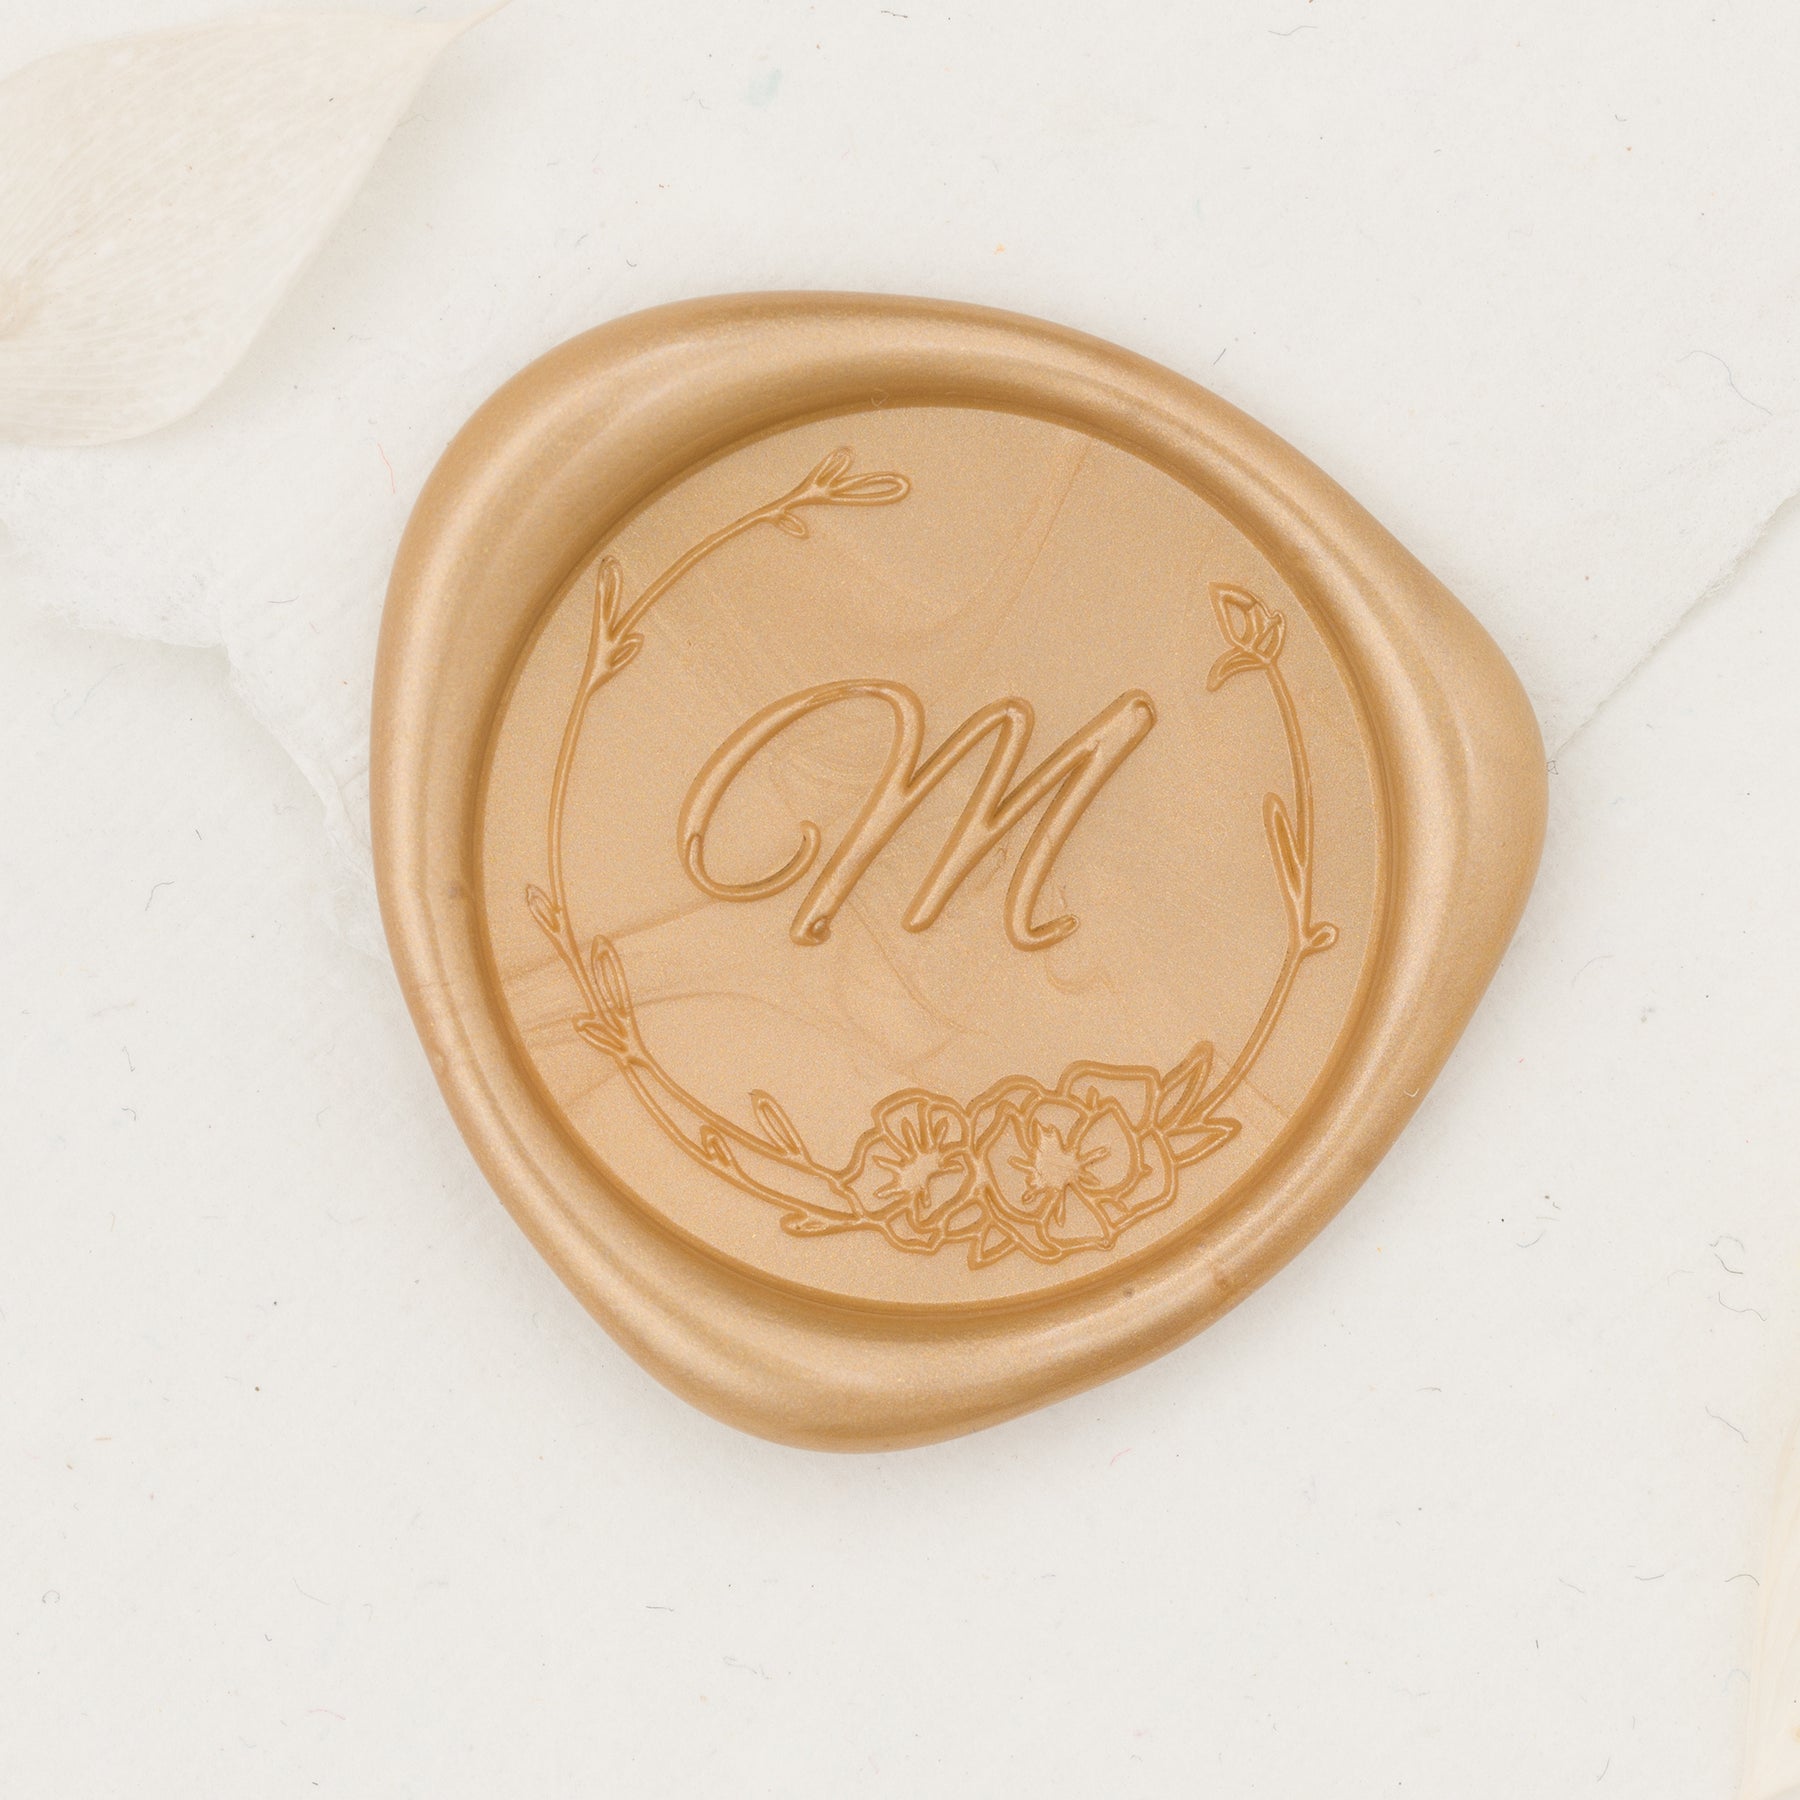 PERSONALIZED WAX SEAL STAMP CUSTOM DESIGN WITH SEALING WAX 50s